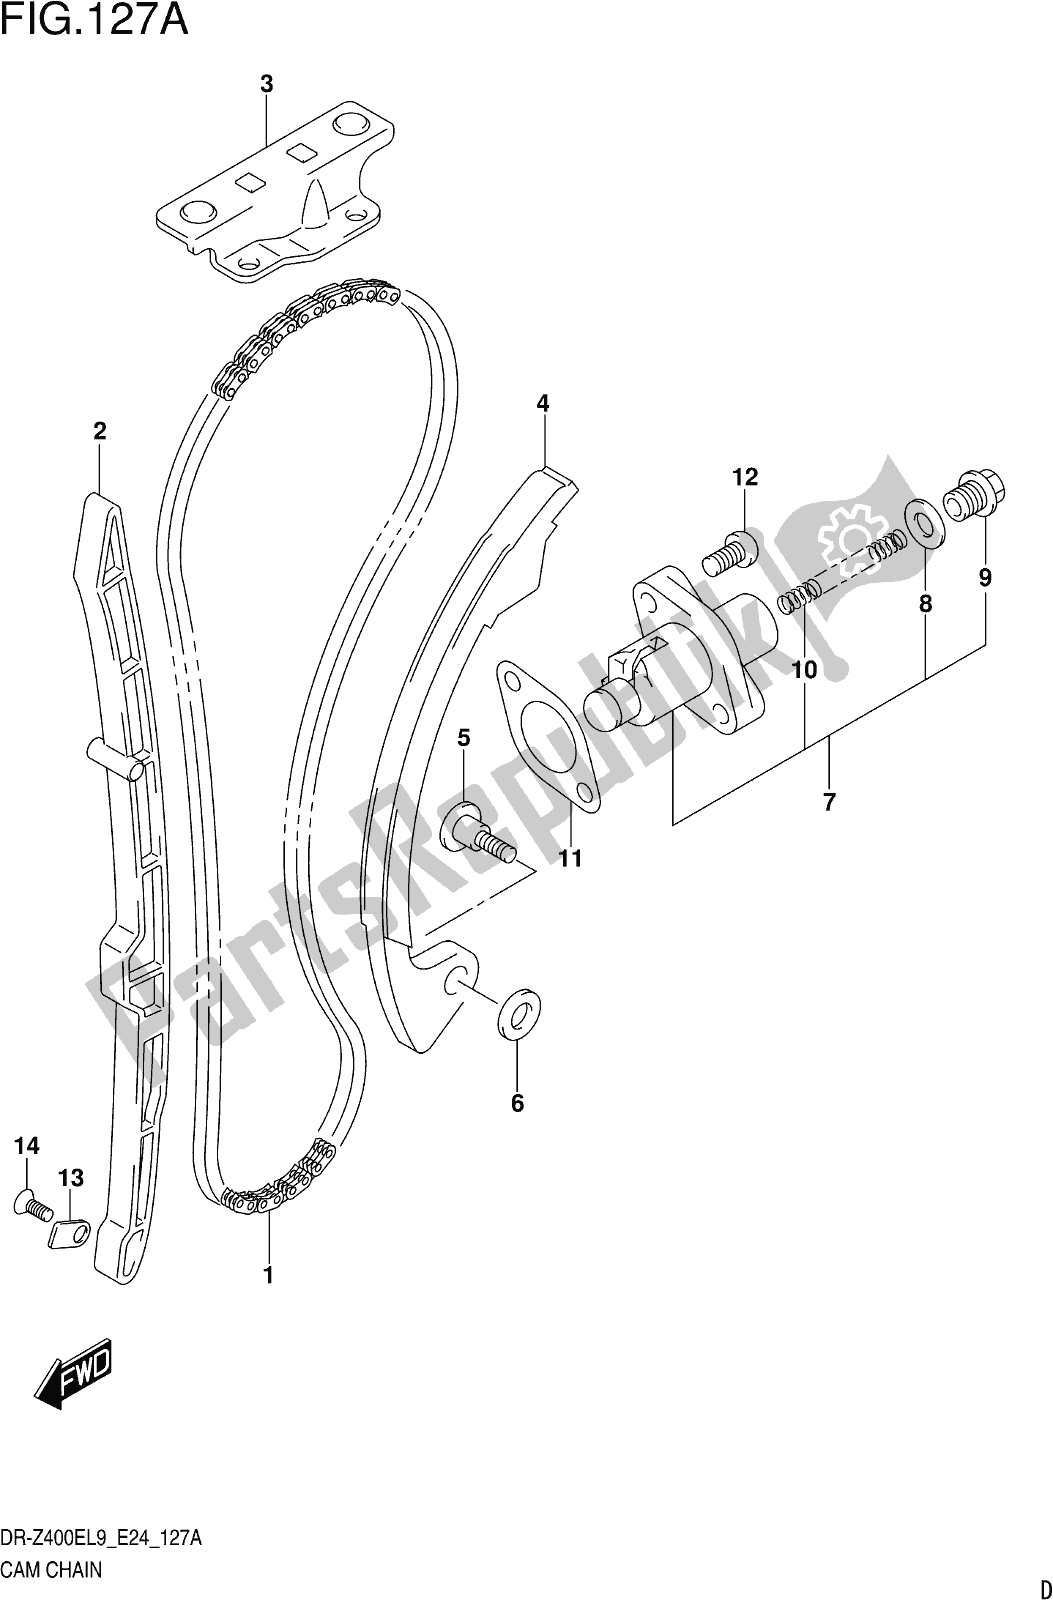 All parts for the Fig. 127a Cam Chain of the Suzuki DR-Z 400E 2019